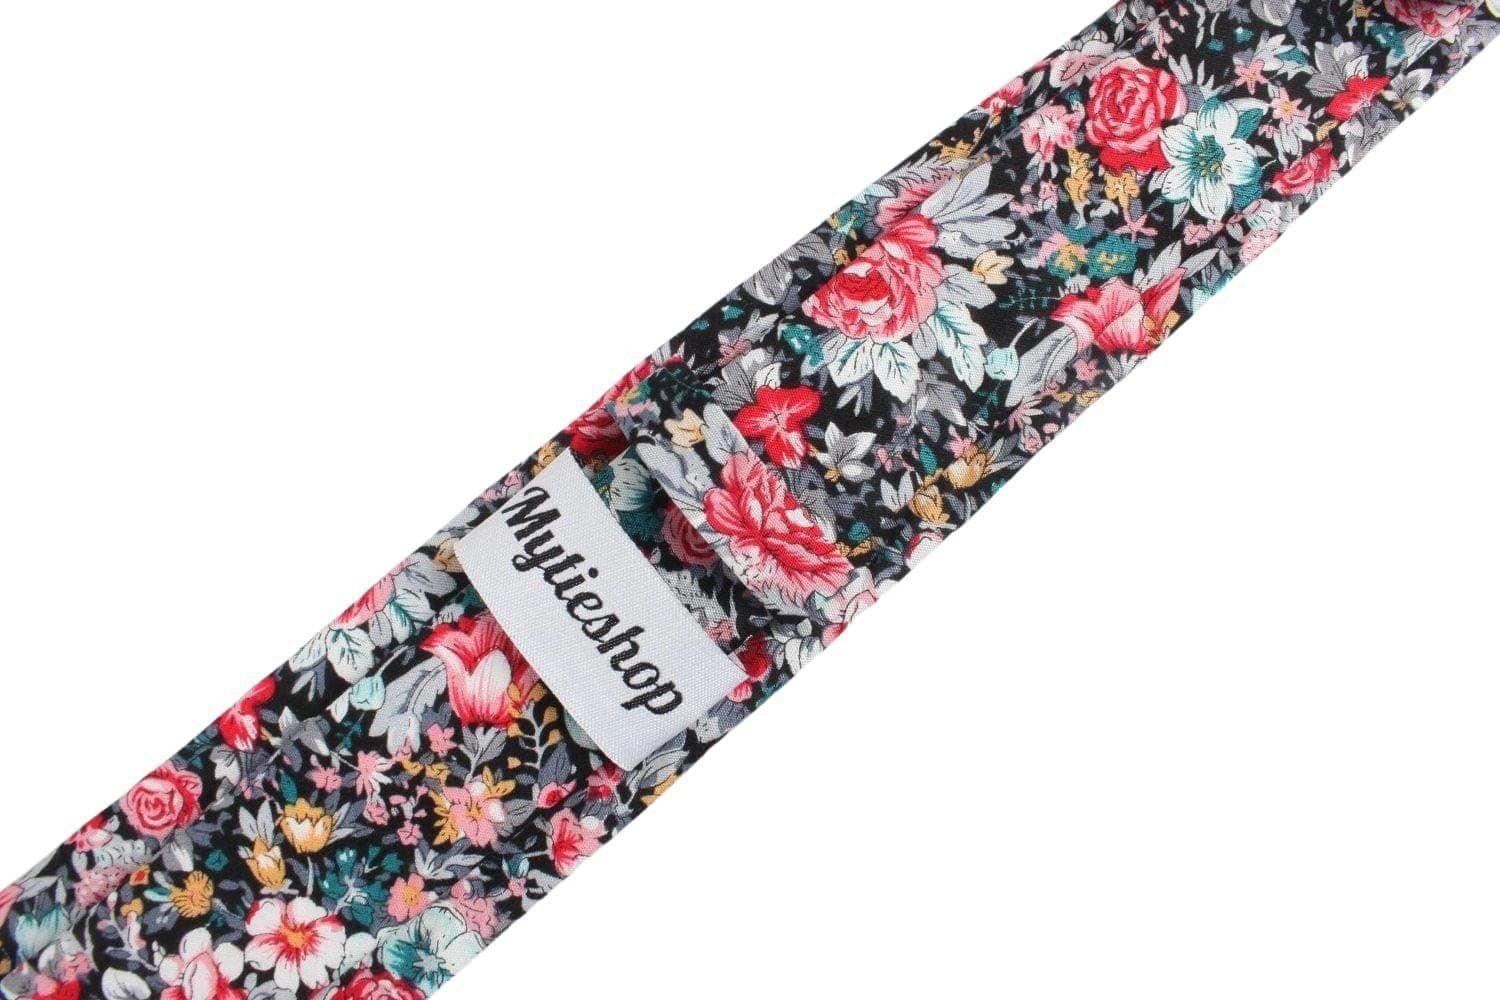 ISAAC Floral Skinny Tie 2.36&quot;-Neckties-ISAAC Floral Skinny Tie Men’s Floral Necktie for weddings and events, great for prom and anniversary gifts. Mens floral ties near me-Mytieshop. Skinny ties for weddings anniversaries. Father of bride. Groomsmen. Cool skinny neckties for men. Neckwear for prom, missions and fancy events. Gift ideas for men. Anniversaries ideas. Wedding aesthetics. Flower ties. Dry flower ties.